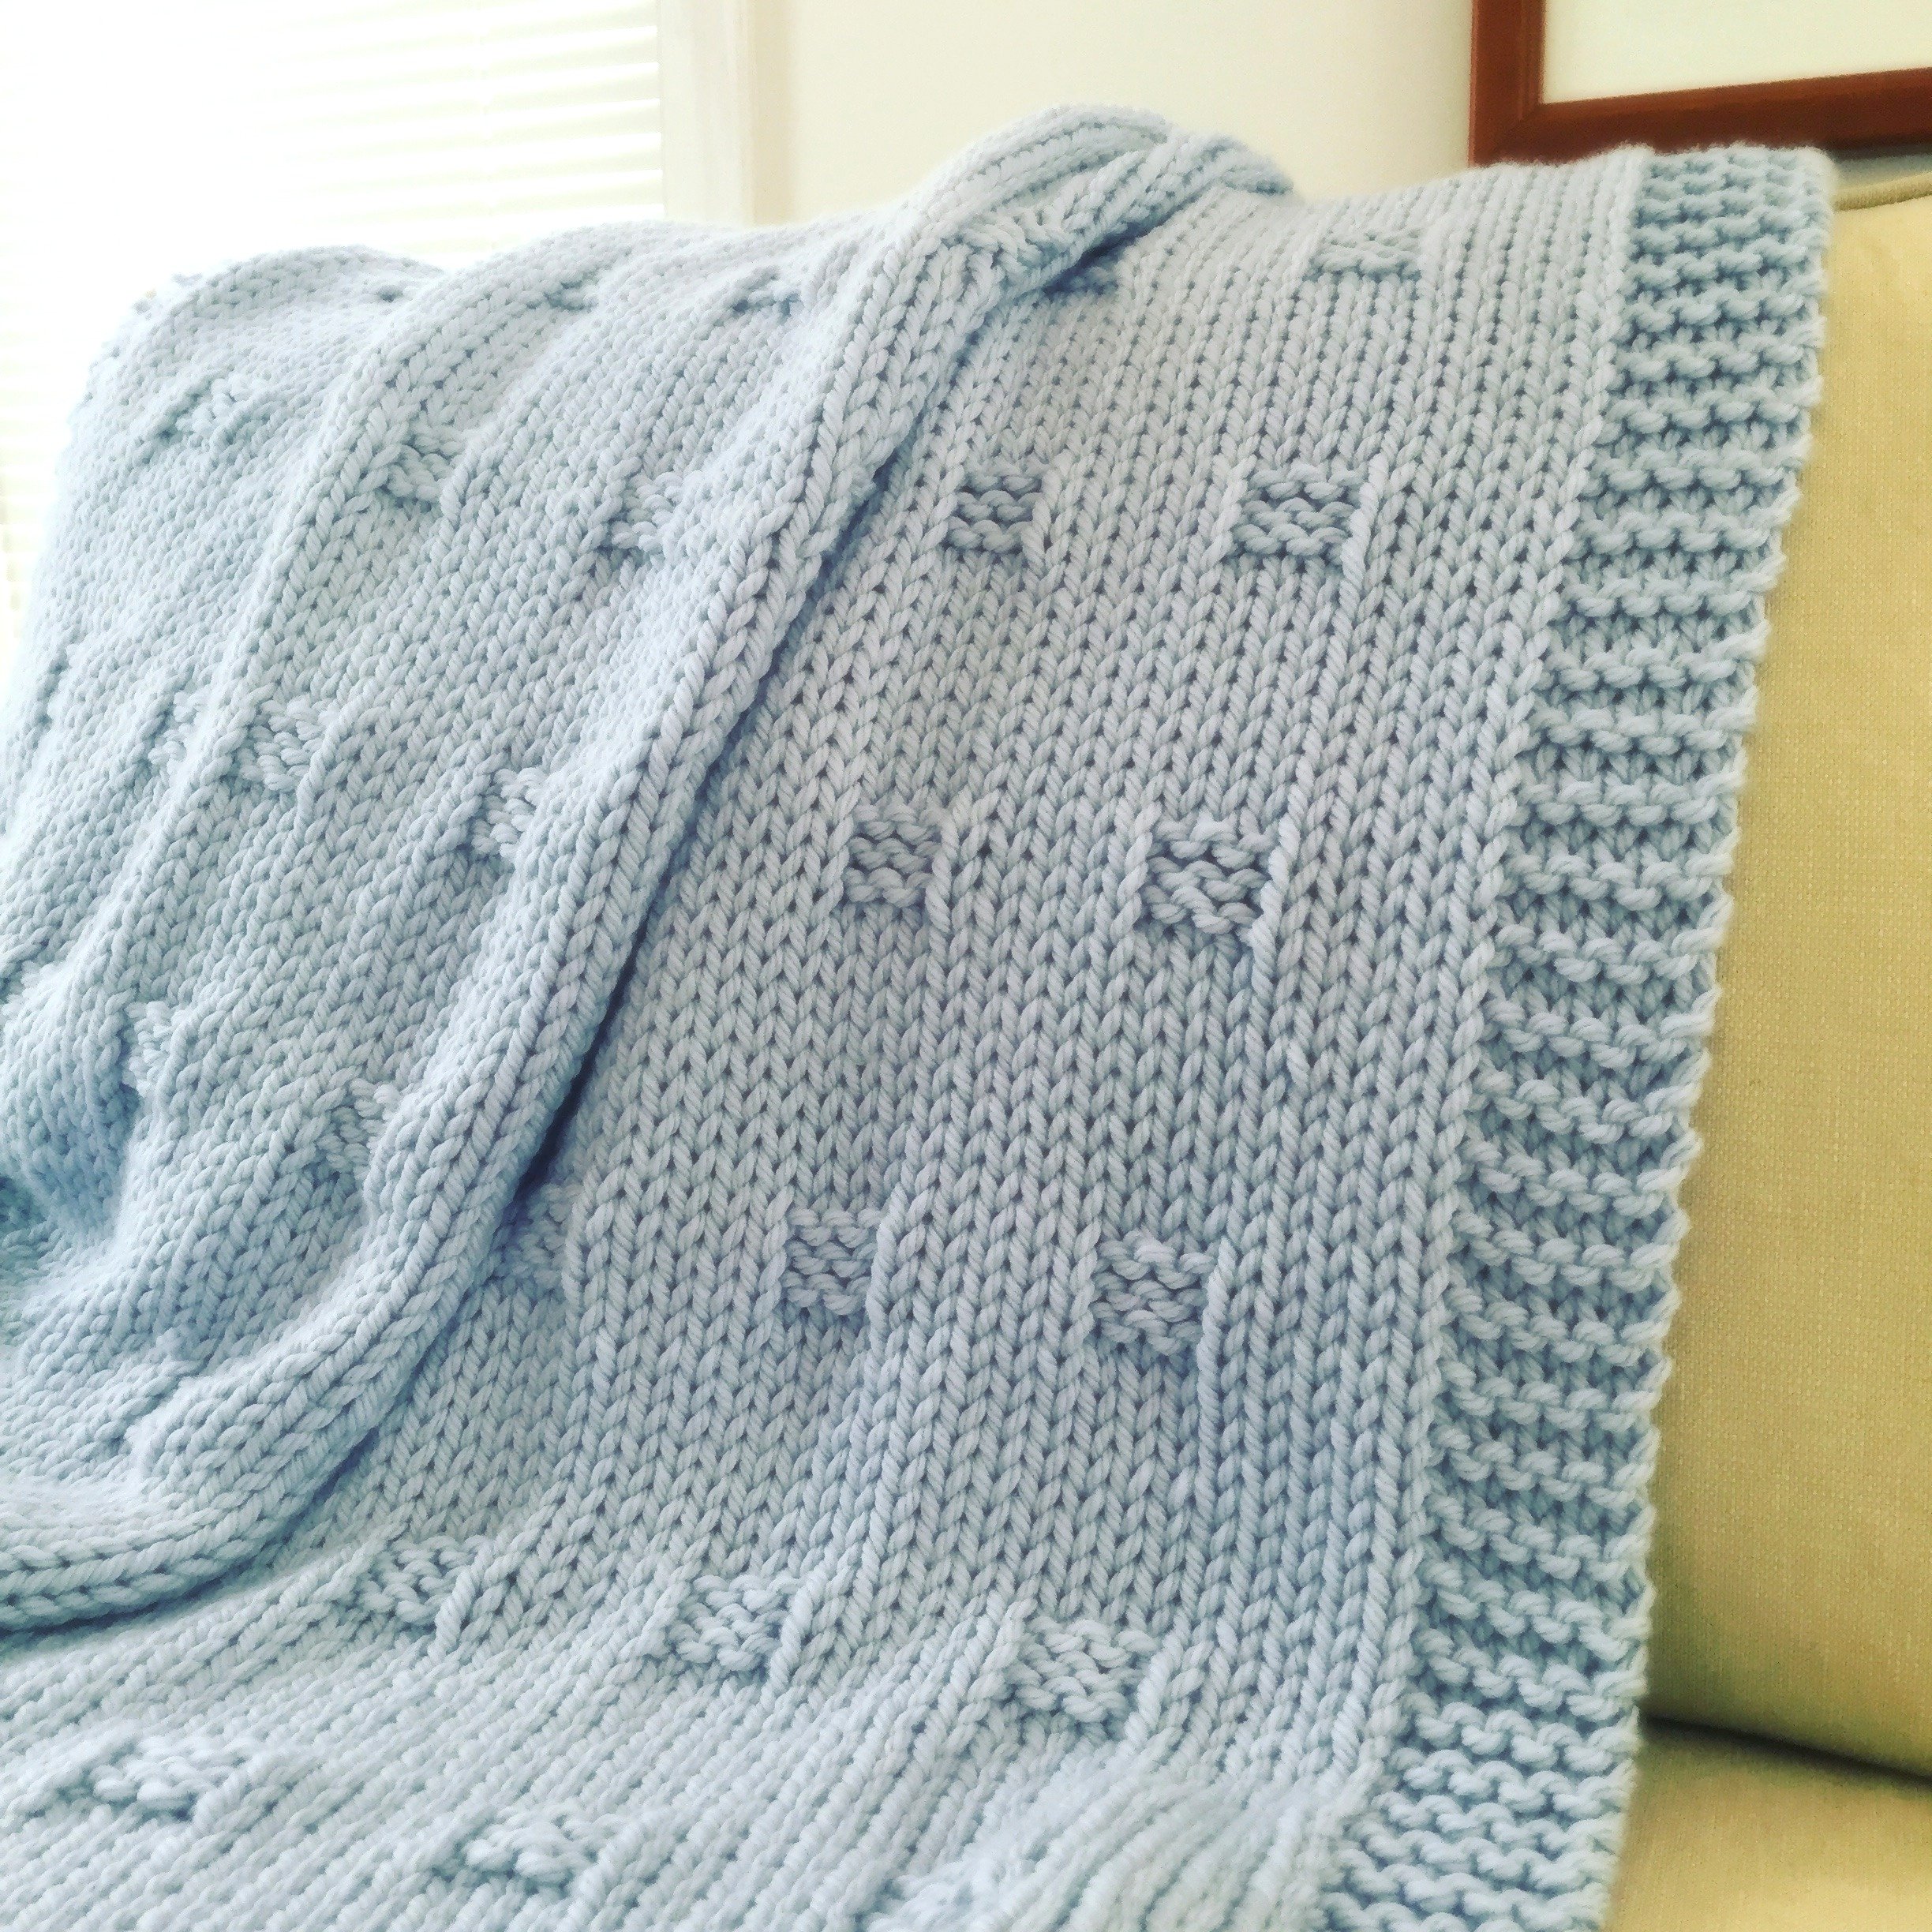 Graph Paper Blanket Knitting Pattern for Super Bulky Yarn Chunky Afghan Throw Easy to Knit.JPG